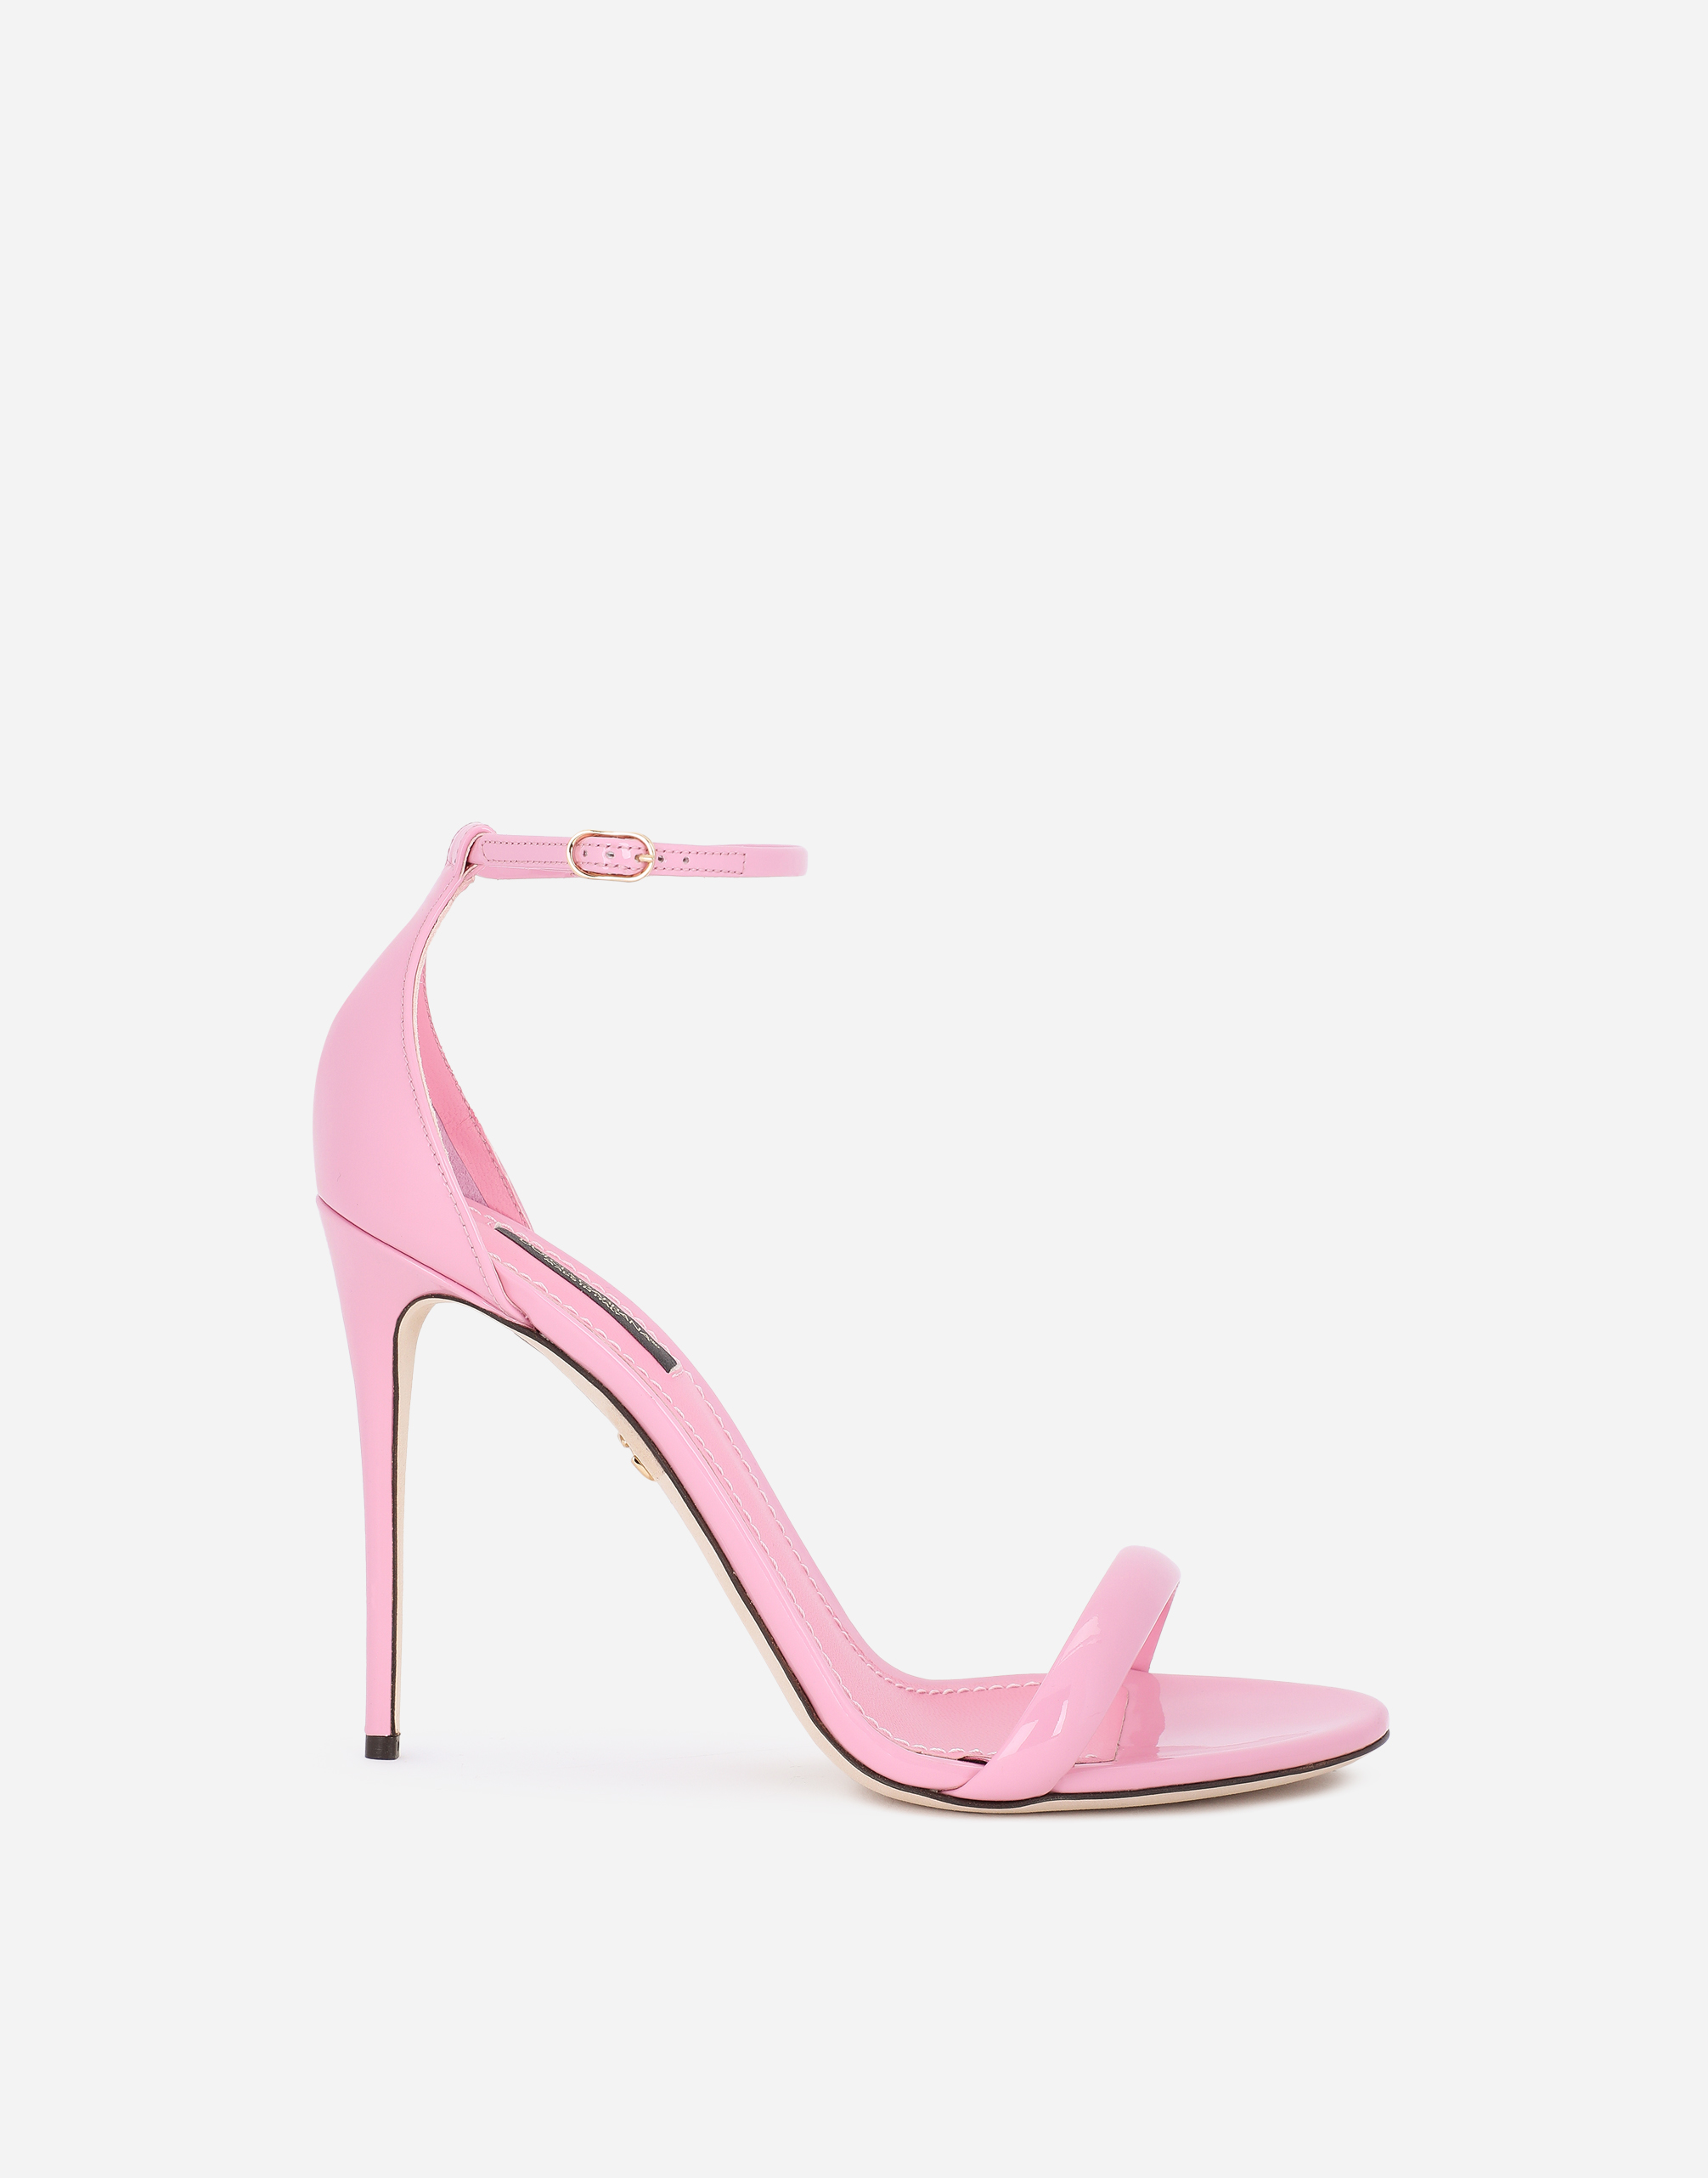 Patent leather sandals in Pink